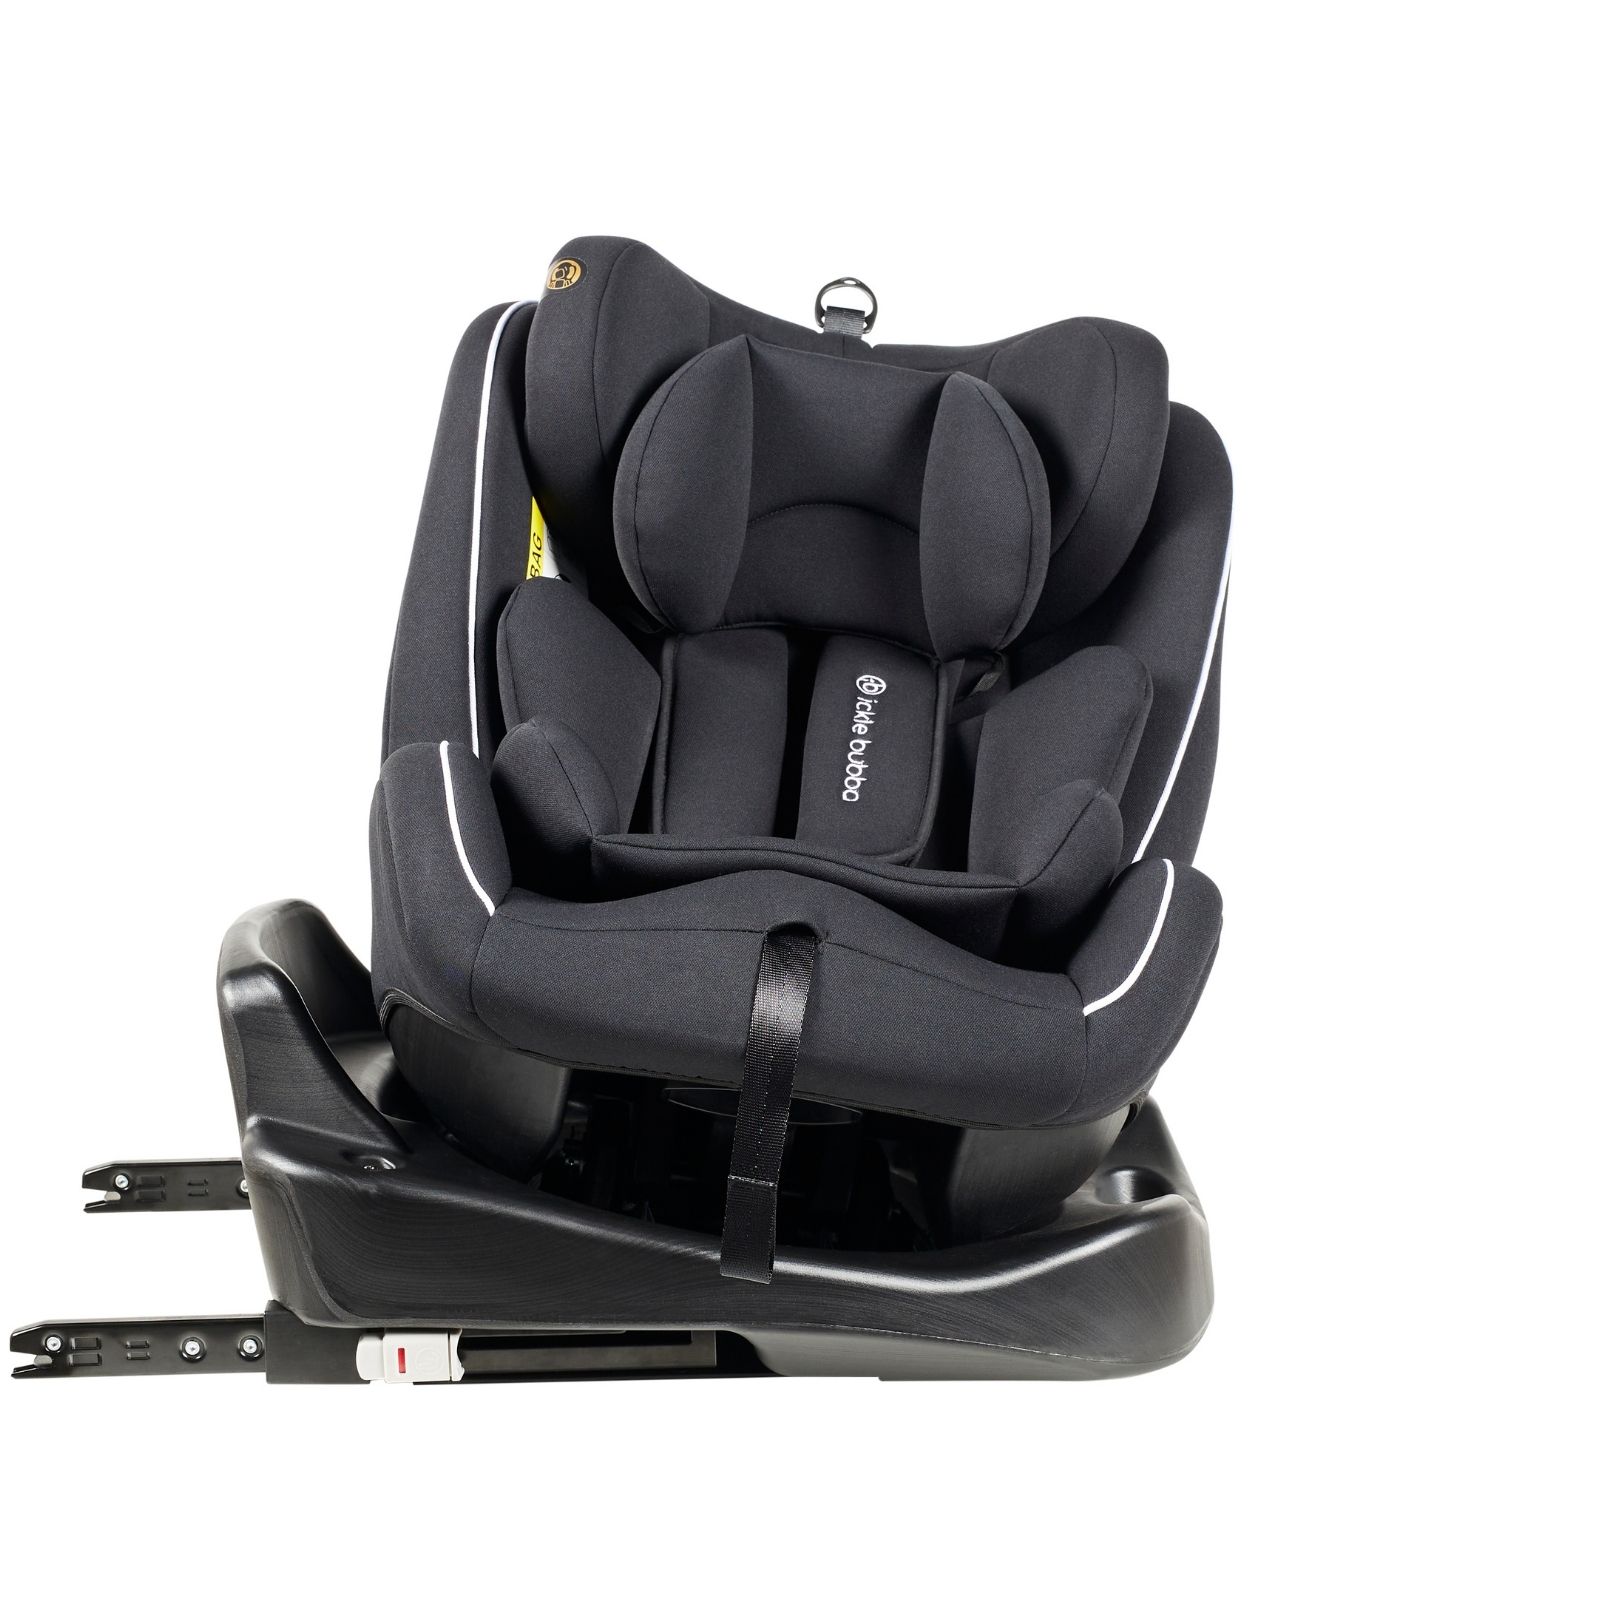 Ickle Bubba Rotator 360 Spin Group 0+/1/2/3 Car Seat - Black